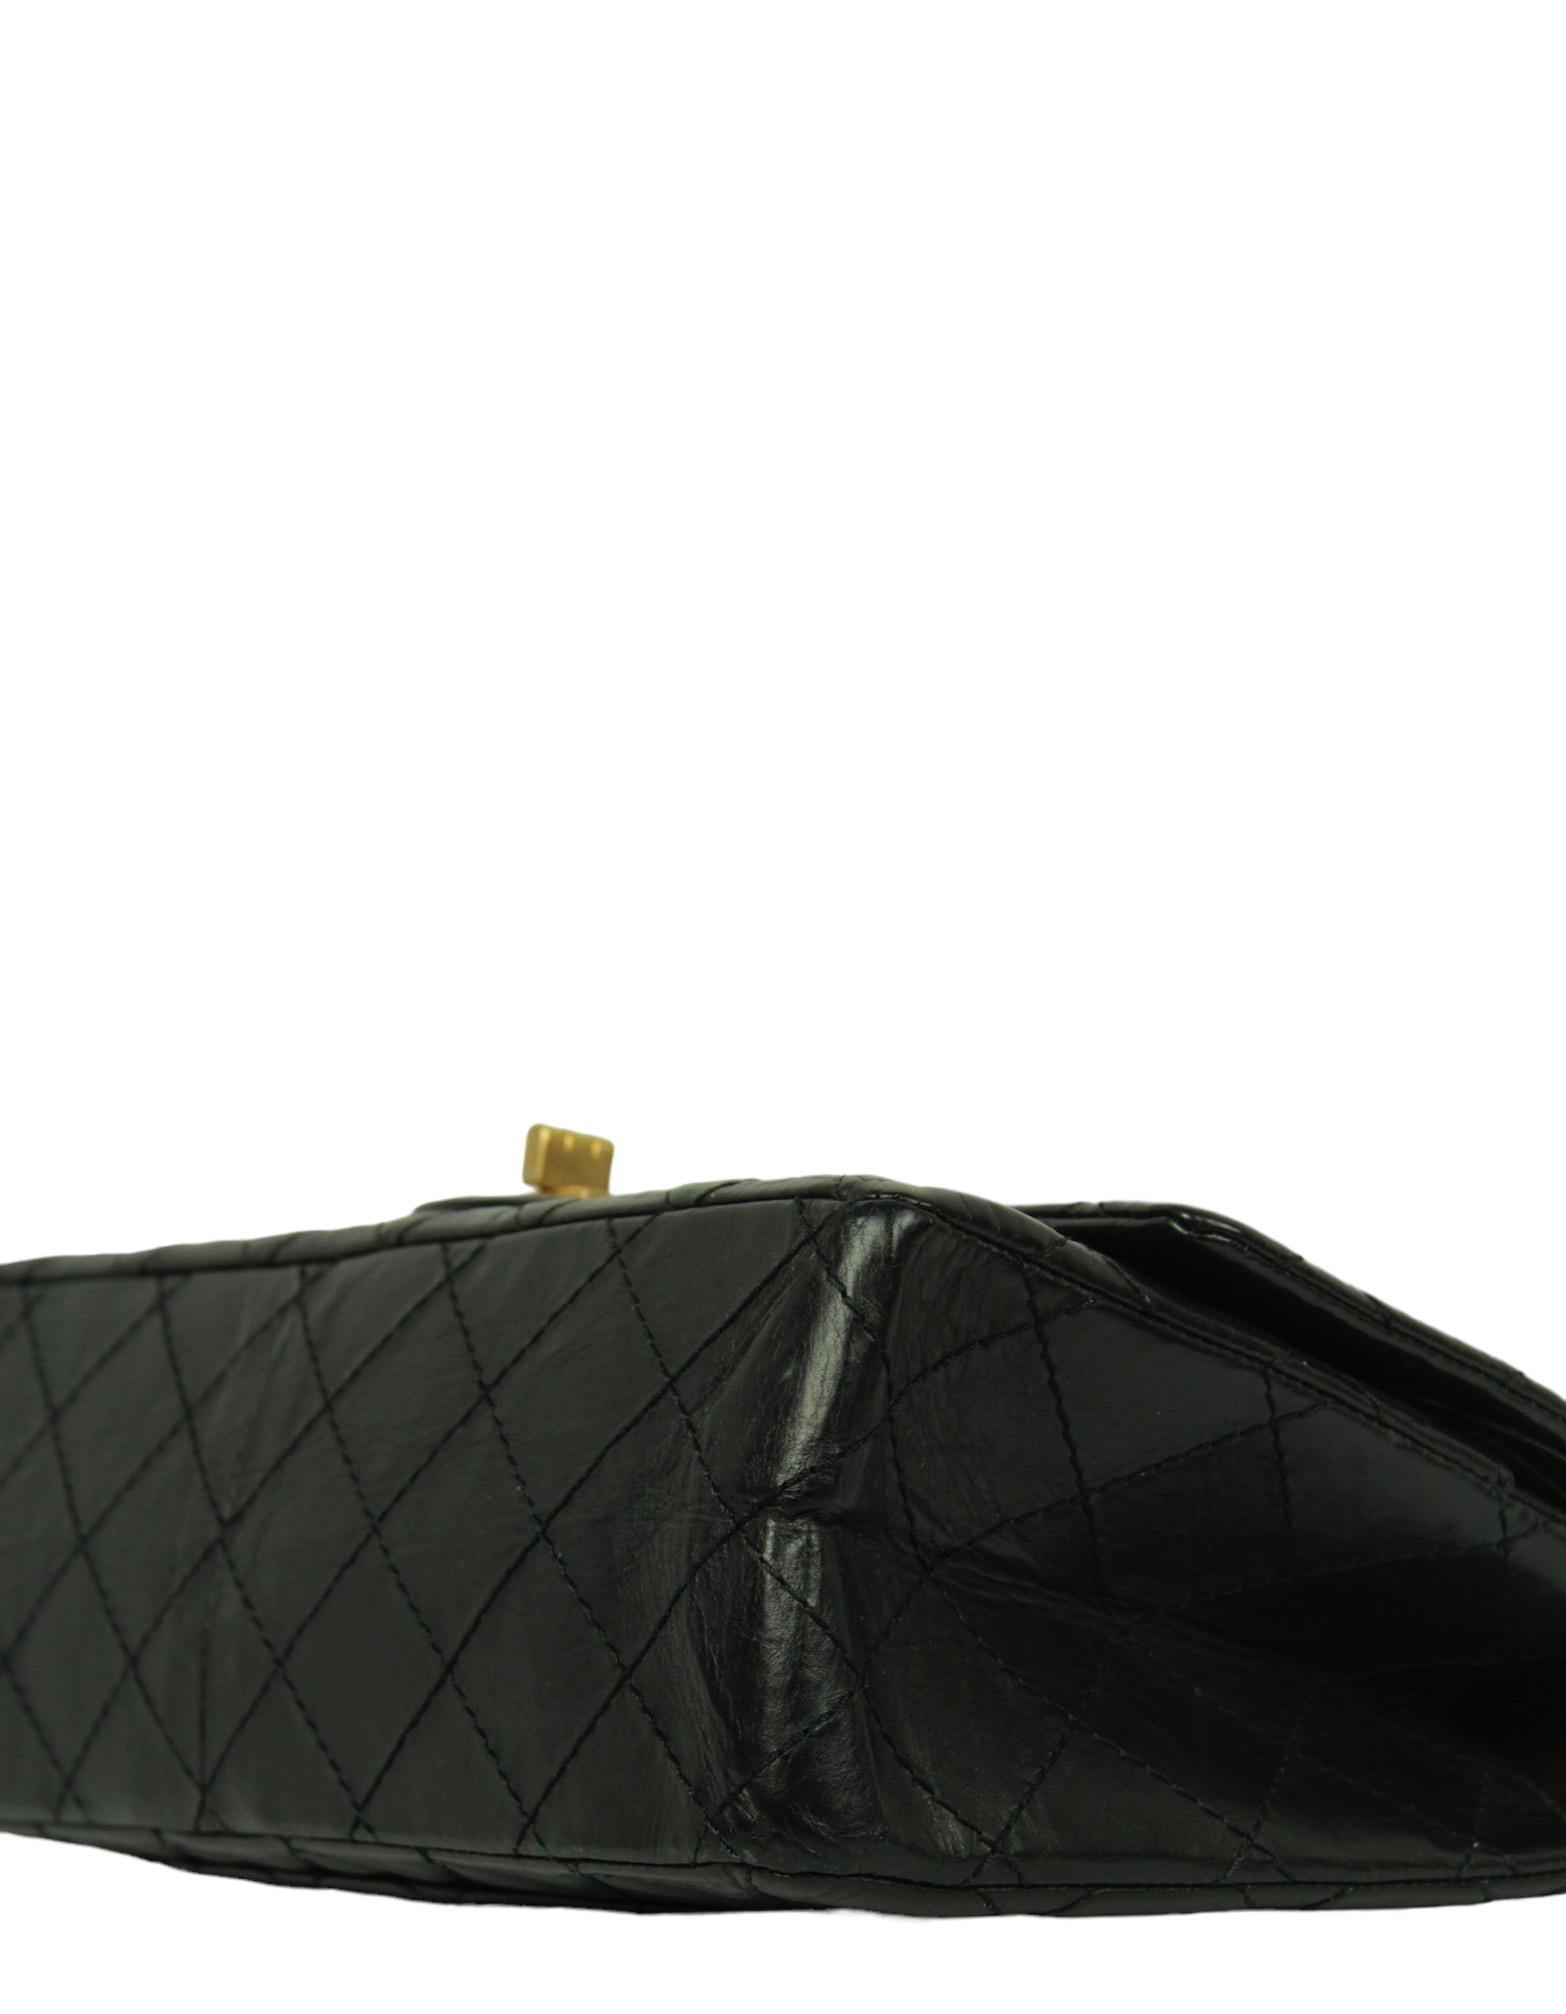 Chanel Black Calfskin Leather Quilted 2.55 Reissue 226 Flap Bag For Sale 1